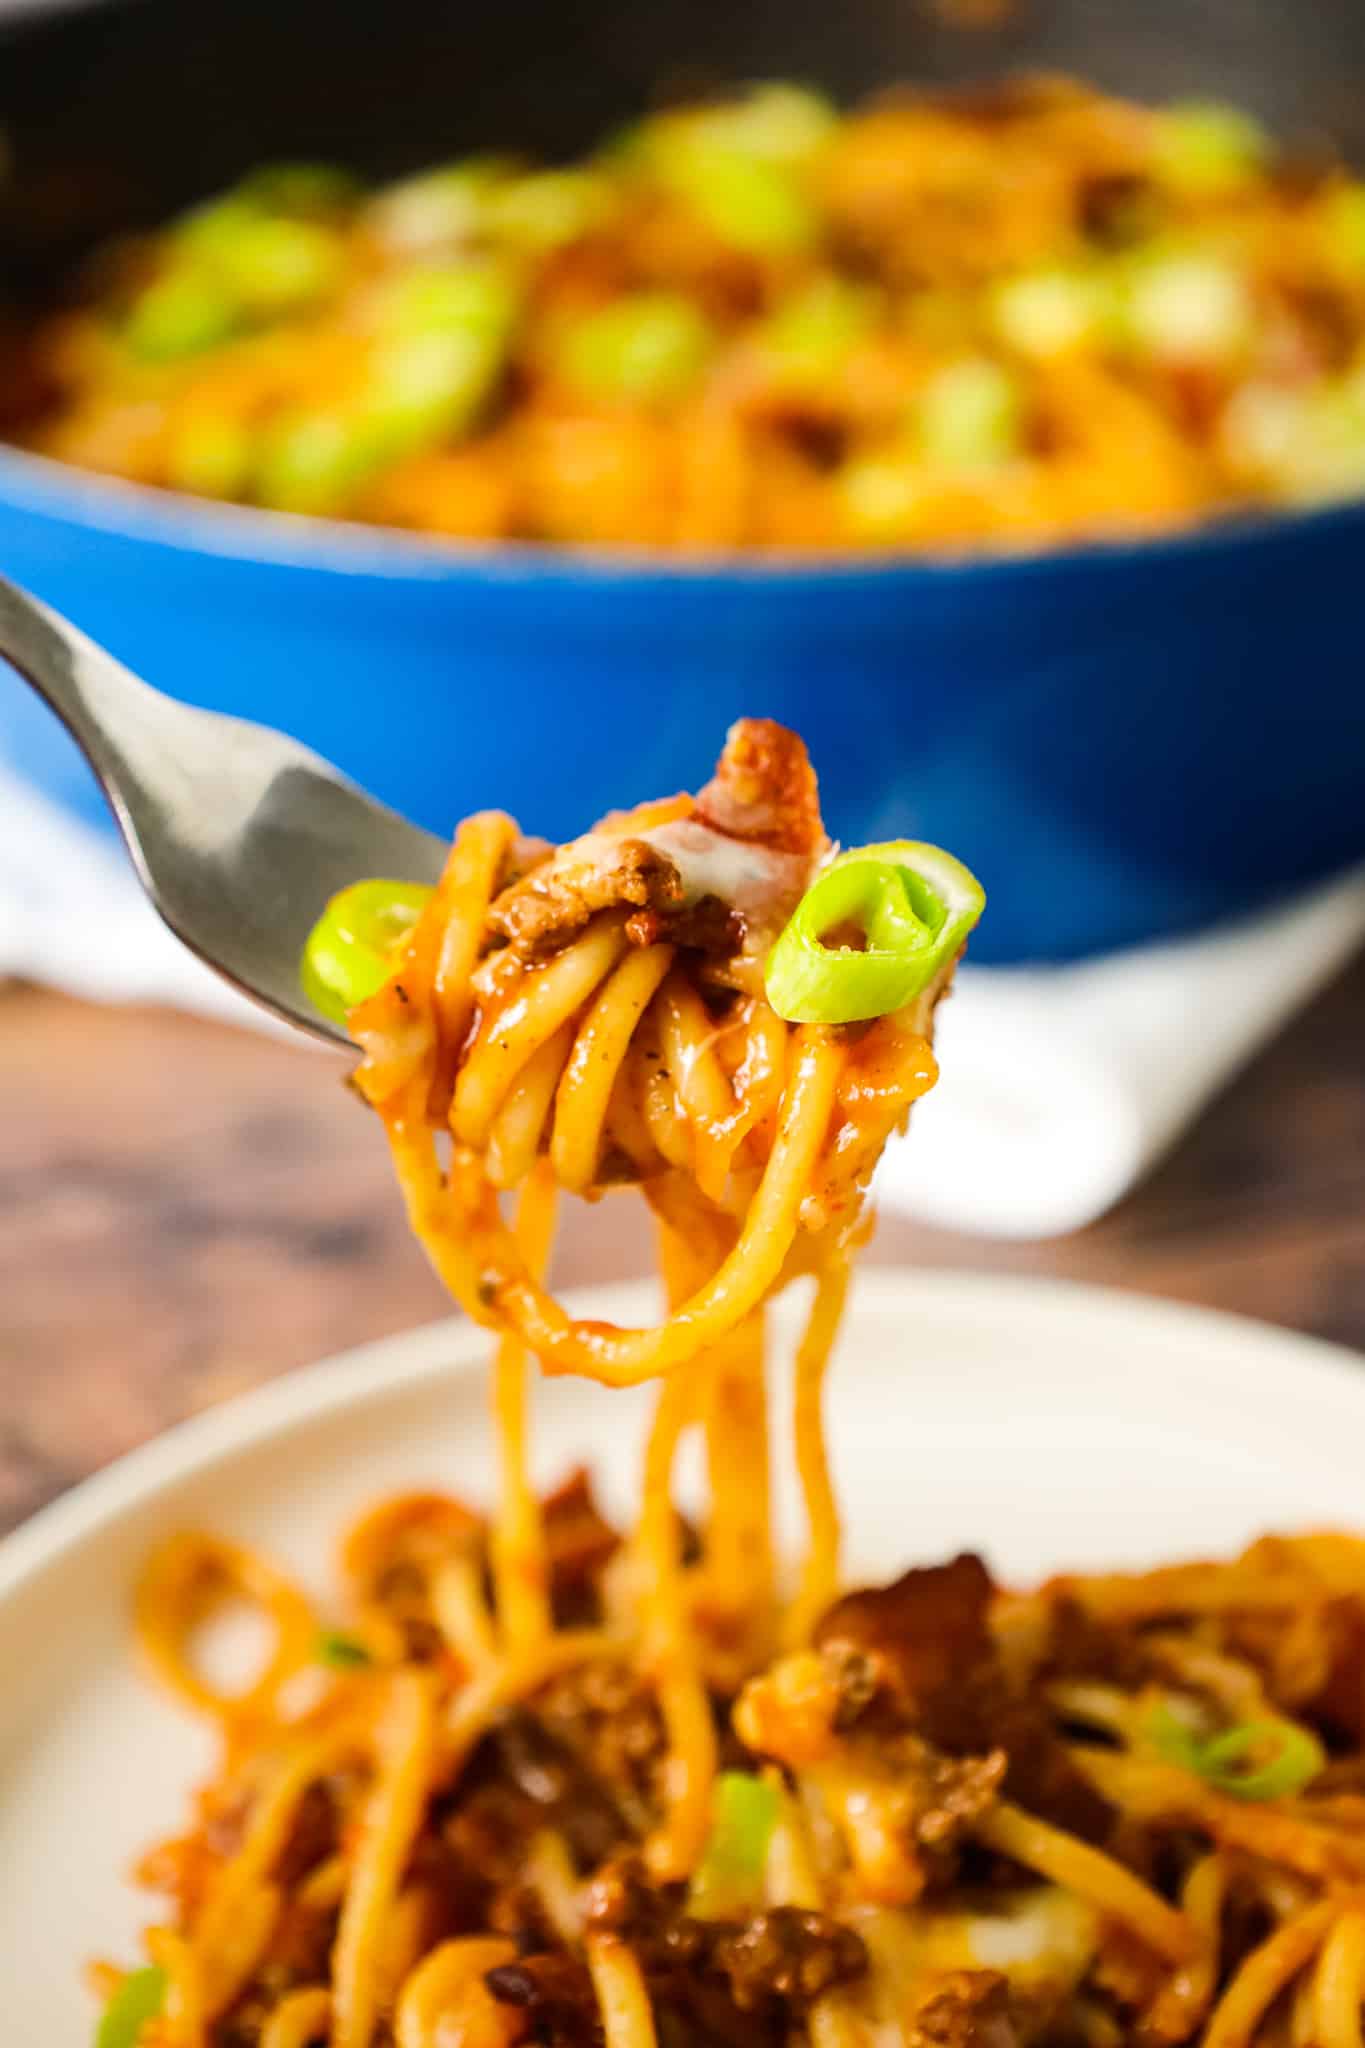 Cowboy Spaghetti is a hearty pasta recipe loaded with bacon, ground beef, Rotel diced tomatoes and green chilies, tomato sauce, bbq sauce, shredded cheese and chopped green onions.